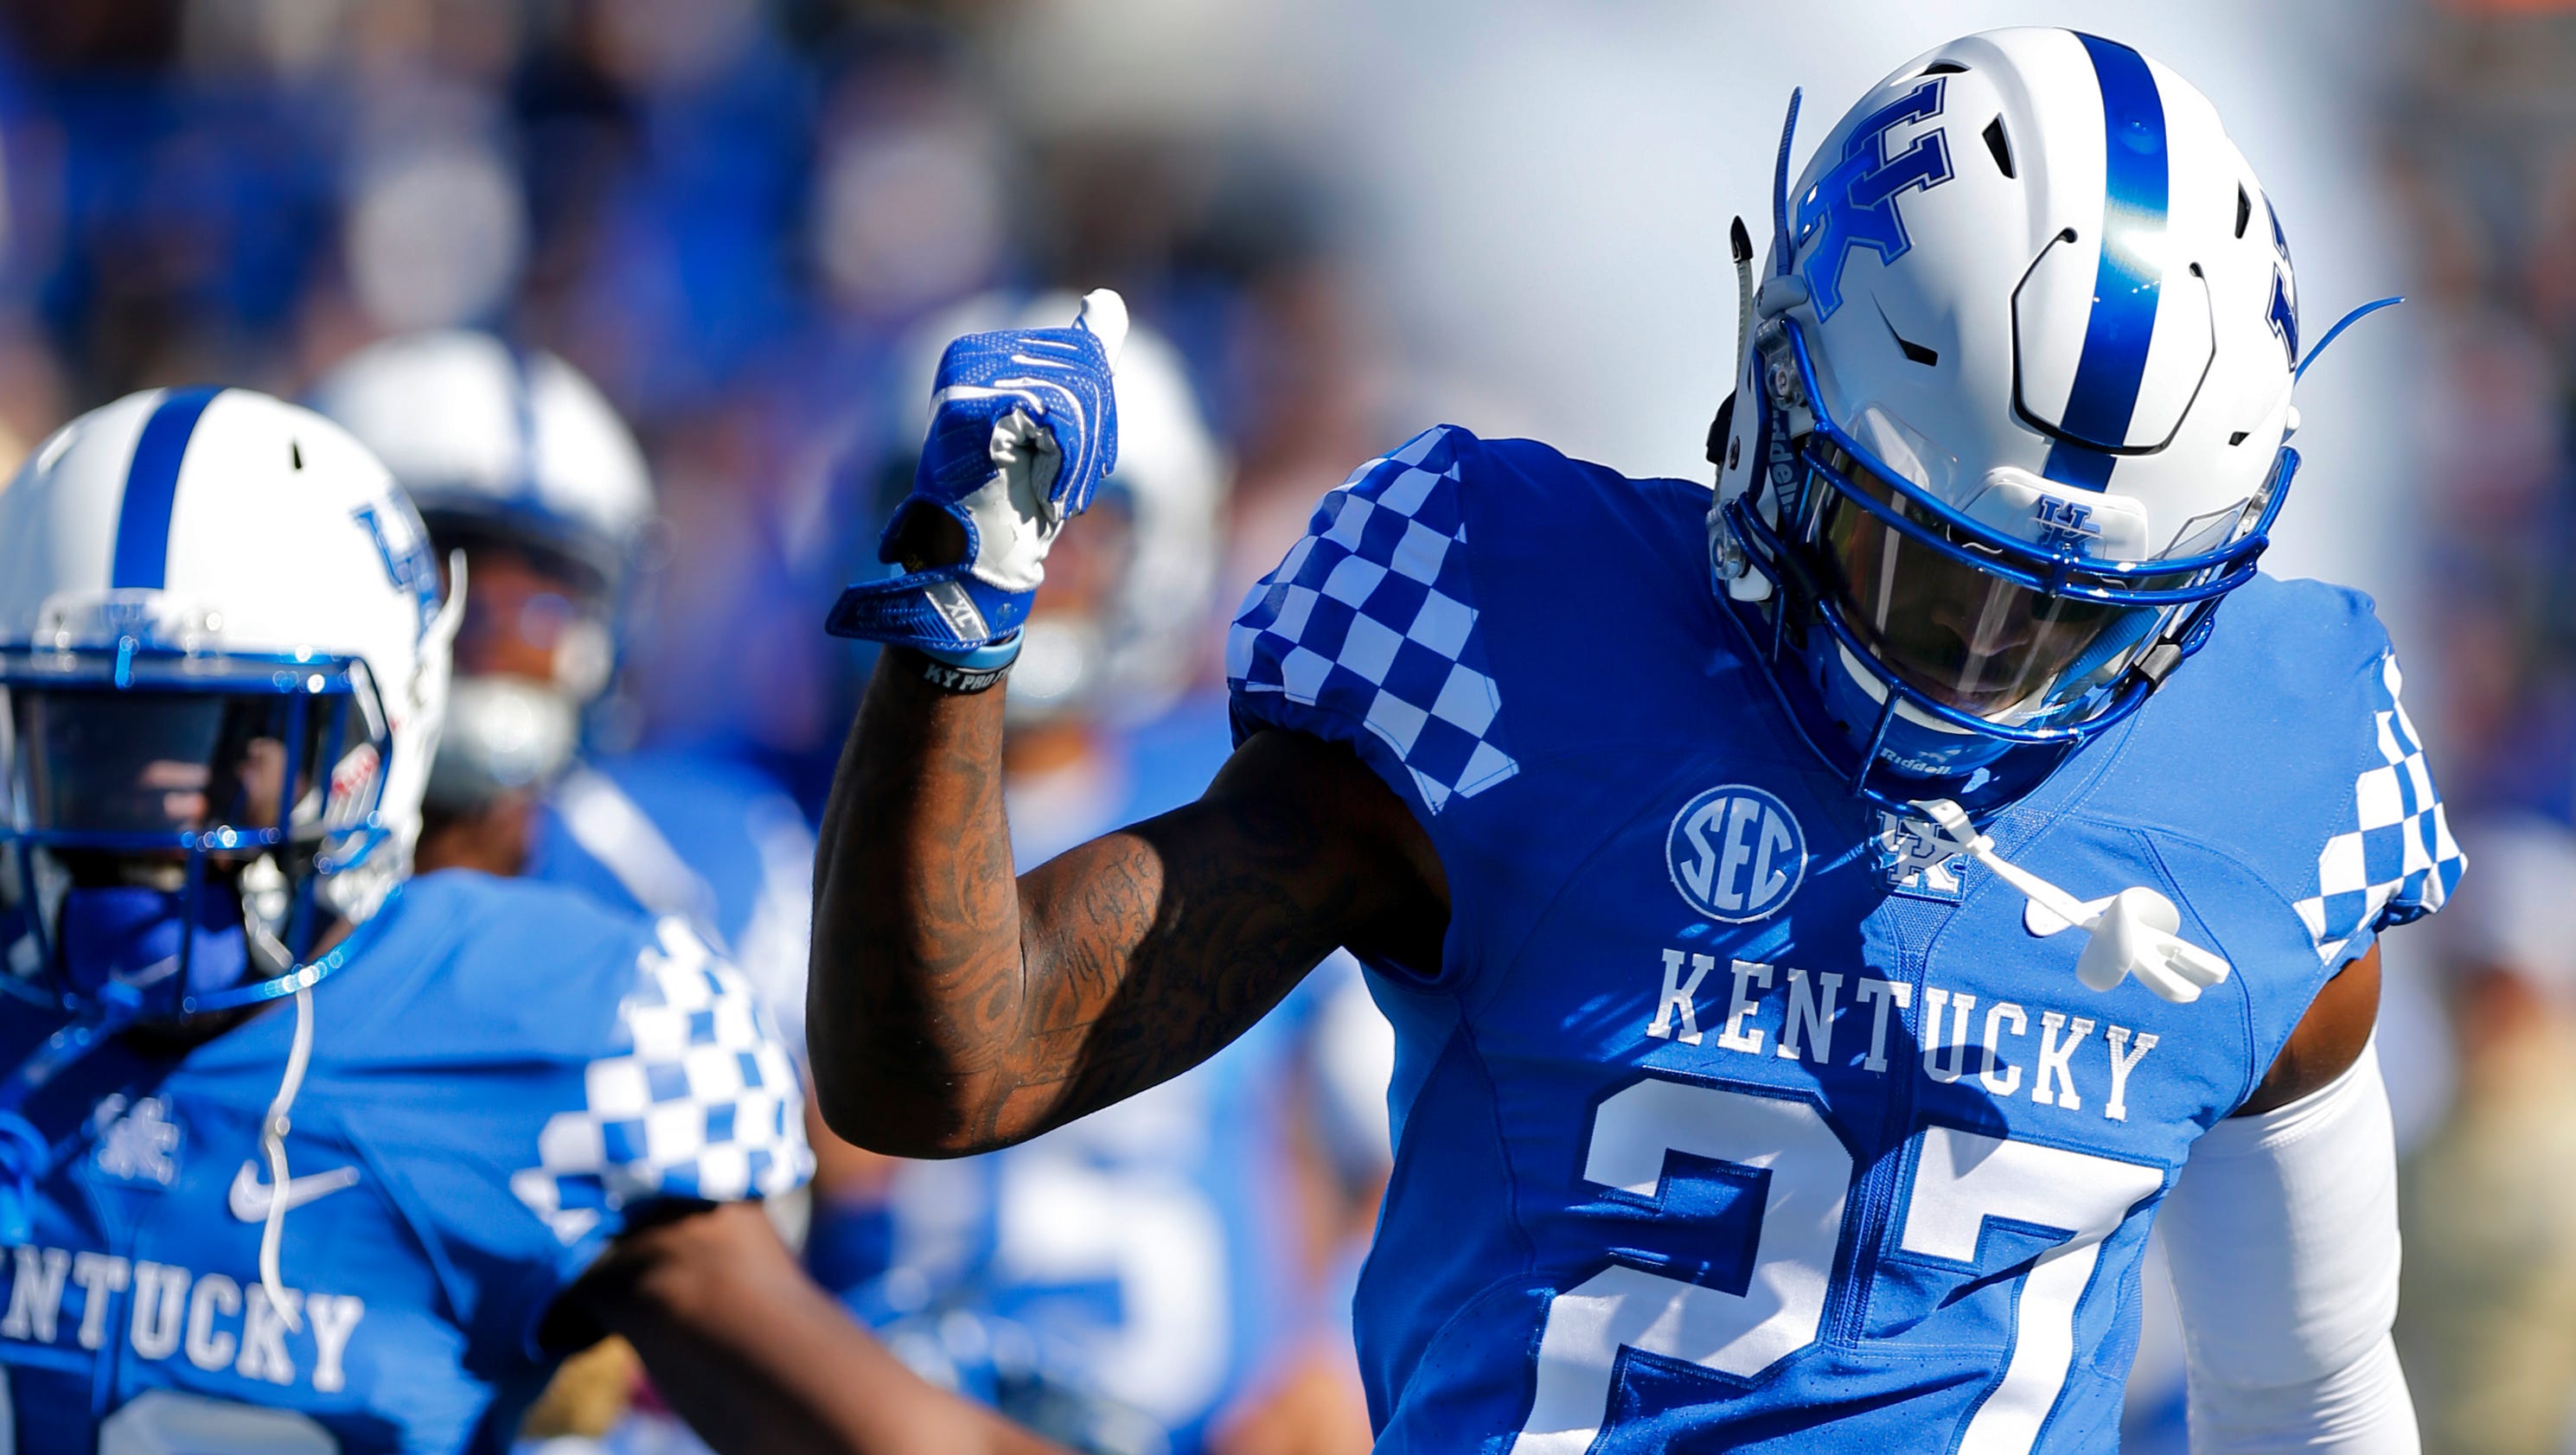 Kentucky Football | Five UK players to watch for 2018 NFL draft3200 x 1680